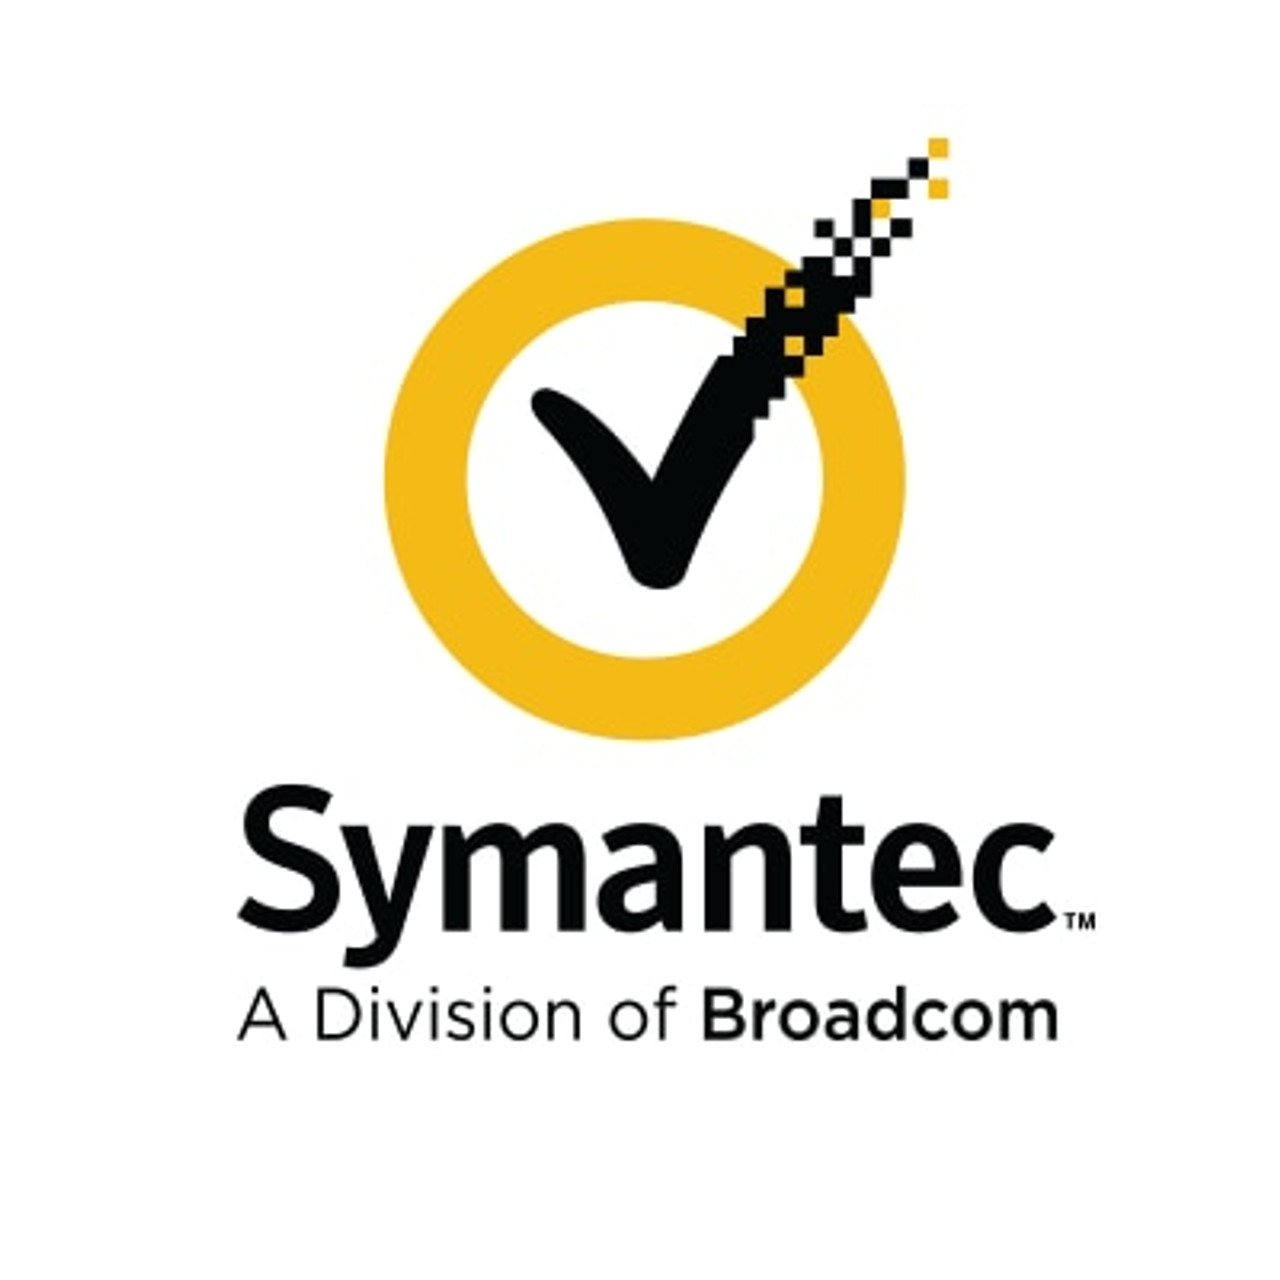 Symantec Complete Endpoint Defense (with SEP), Initial Hybrid Subscription License with Support, 500-999 Devices 3 YR